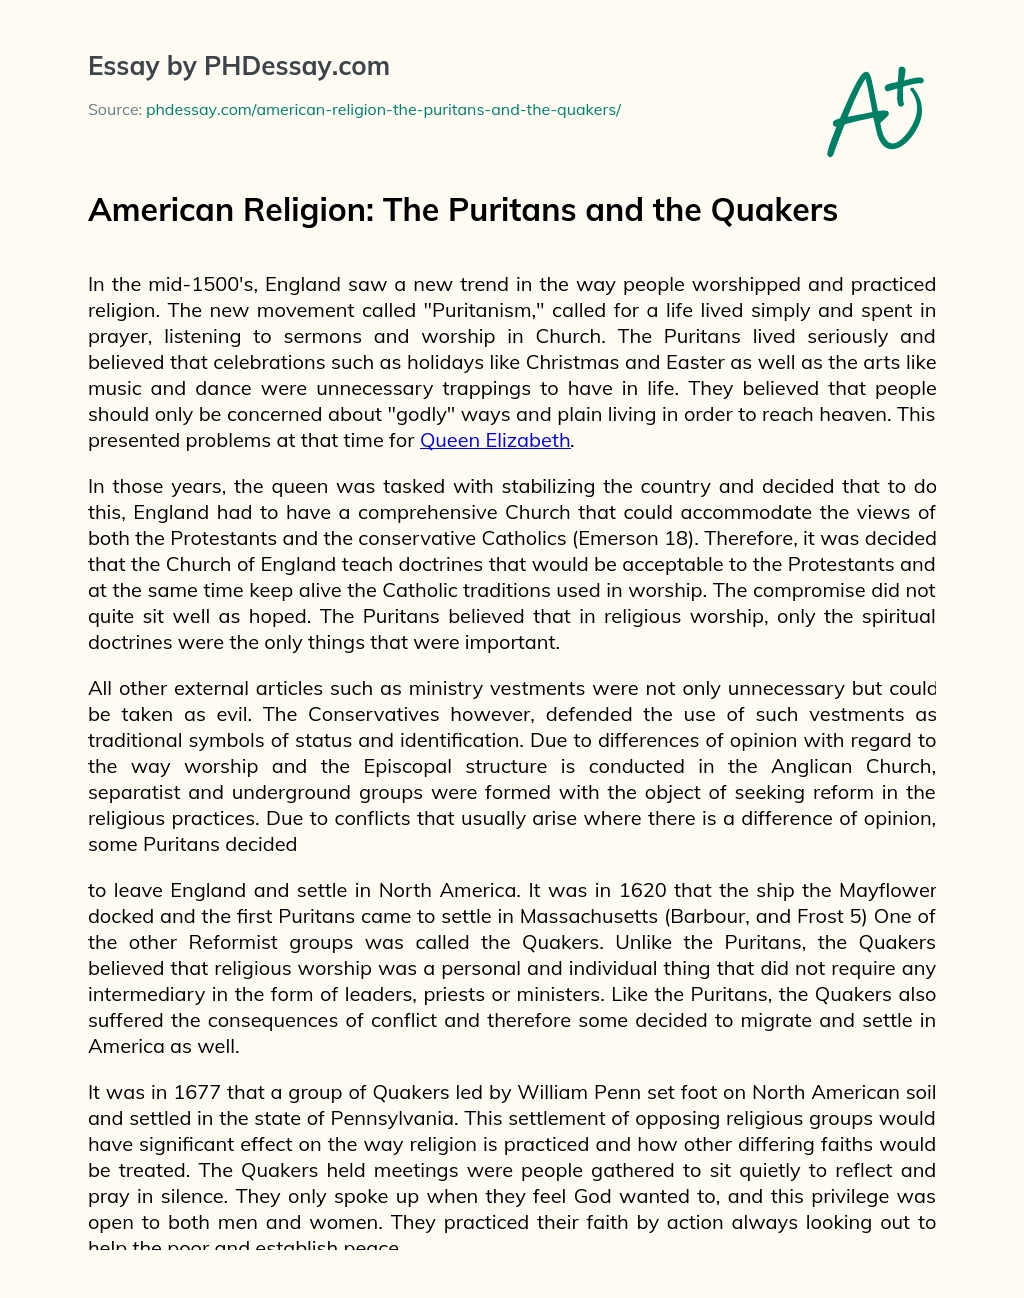 American Religion: The Puritans and the Quakers essay